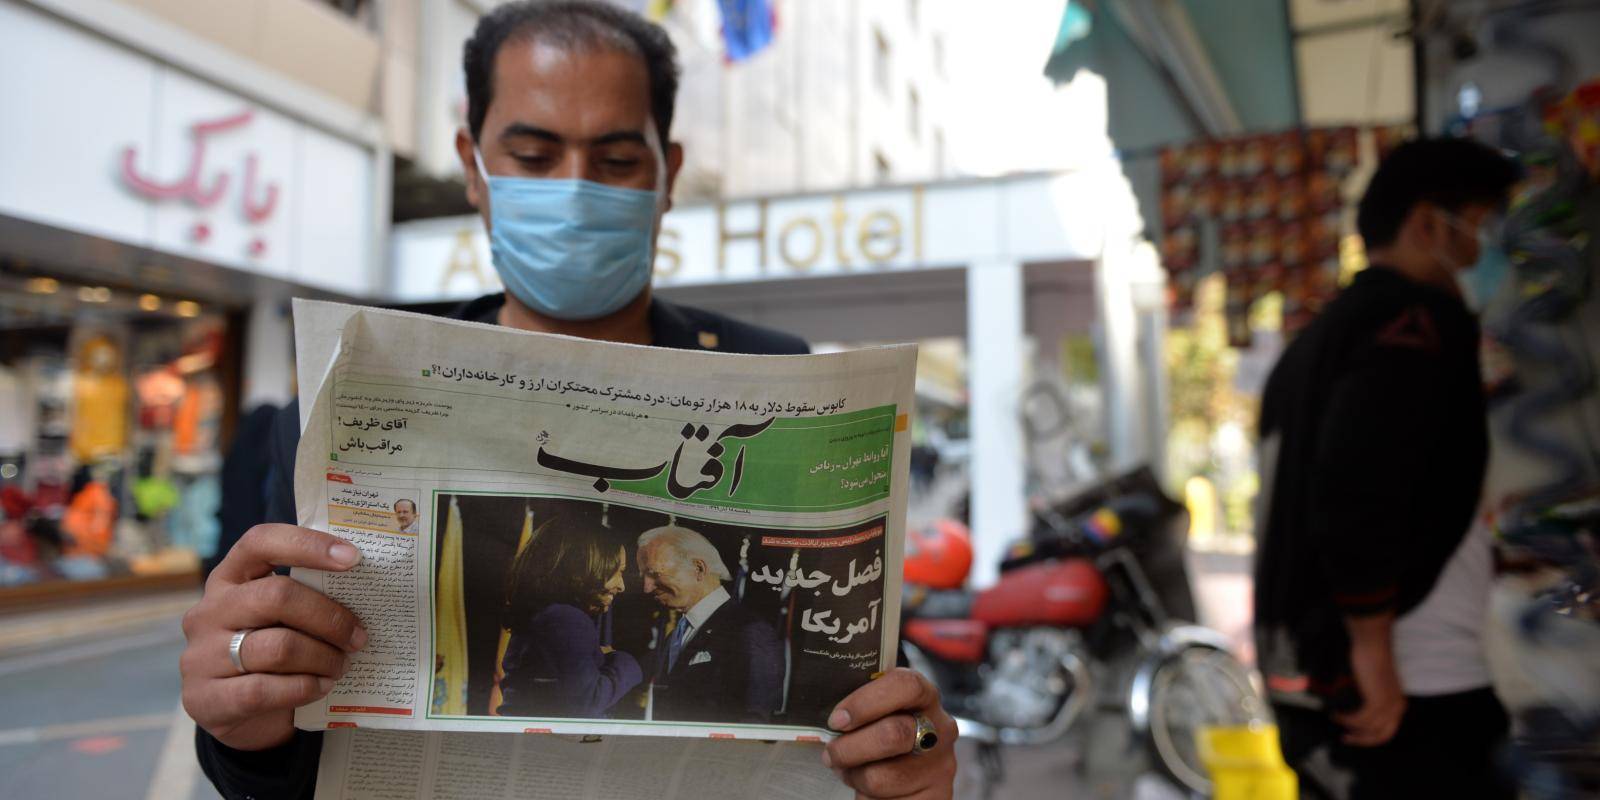 A man stands on a Tehran street reading a Farsi-language newspaper showing a picture of Joe Biden